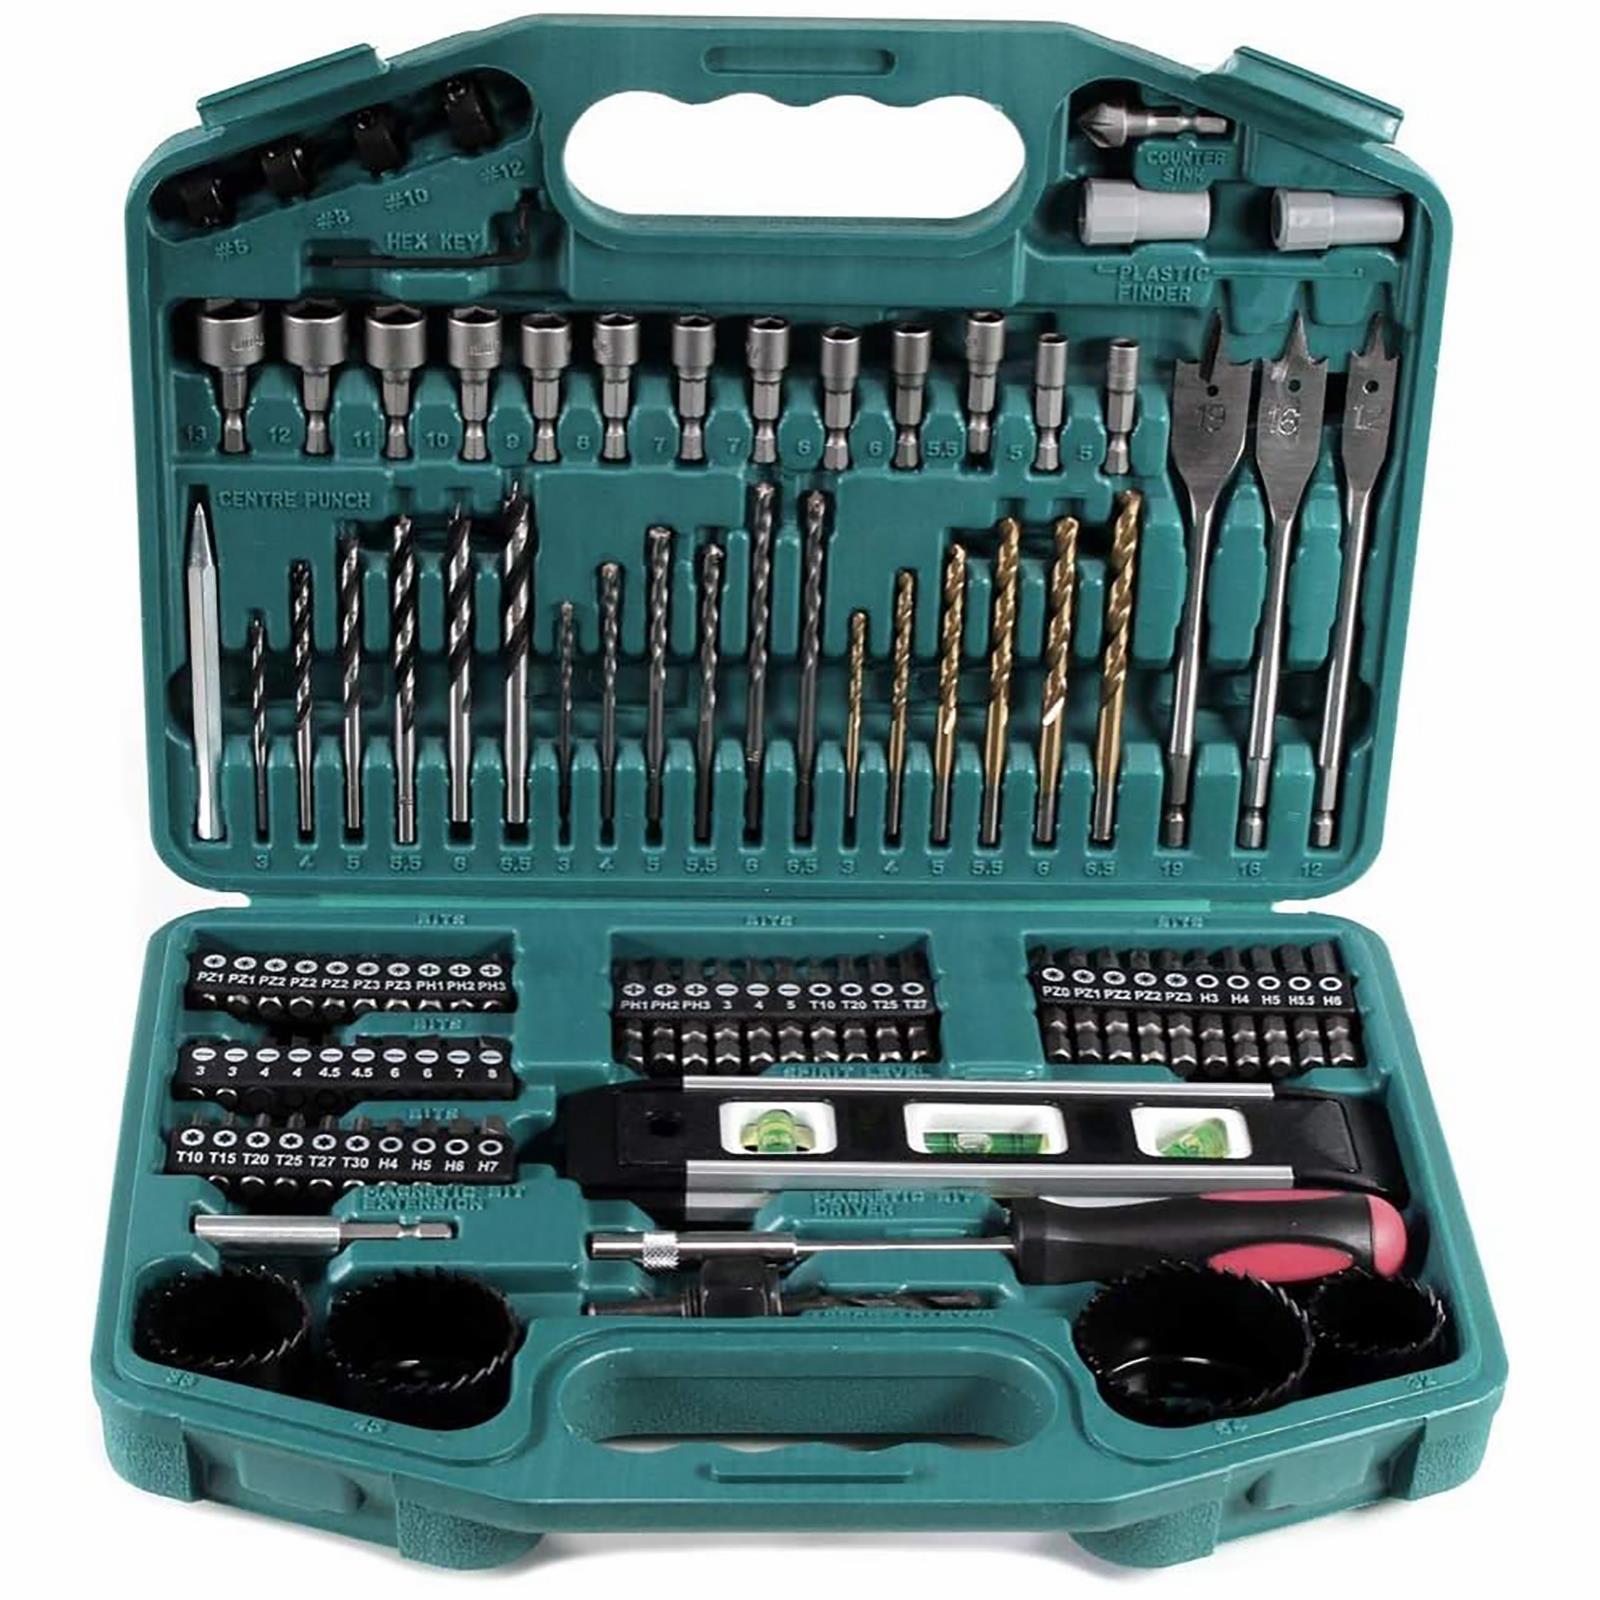 Makita Drill and Screwdriver Bit Set 101 Pieces in Carry Case P-67832